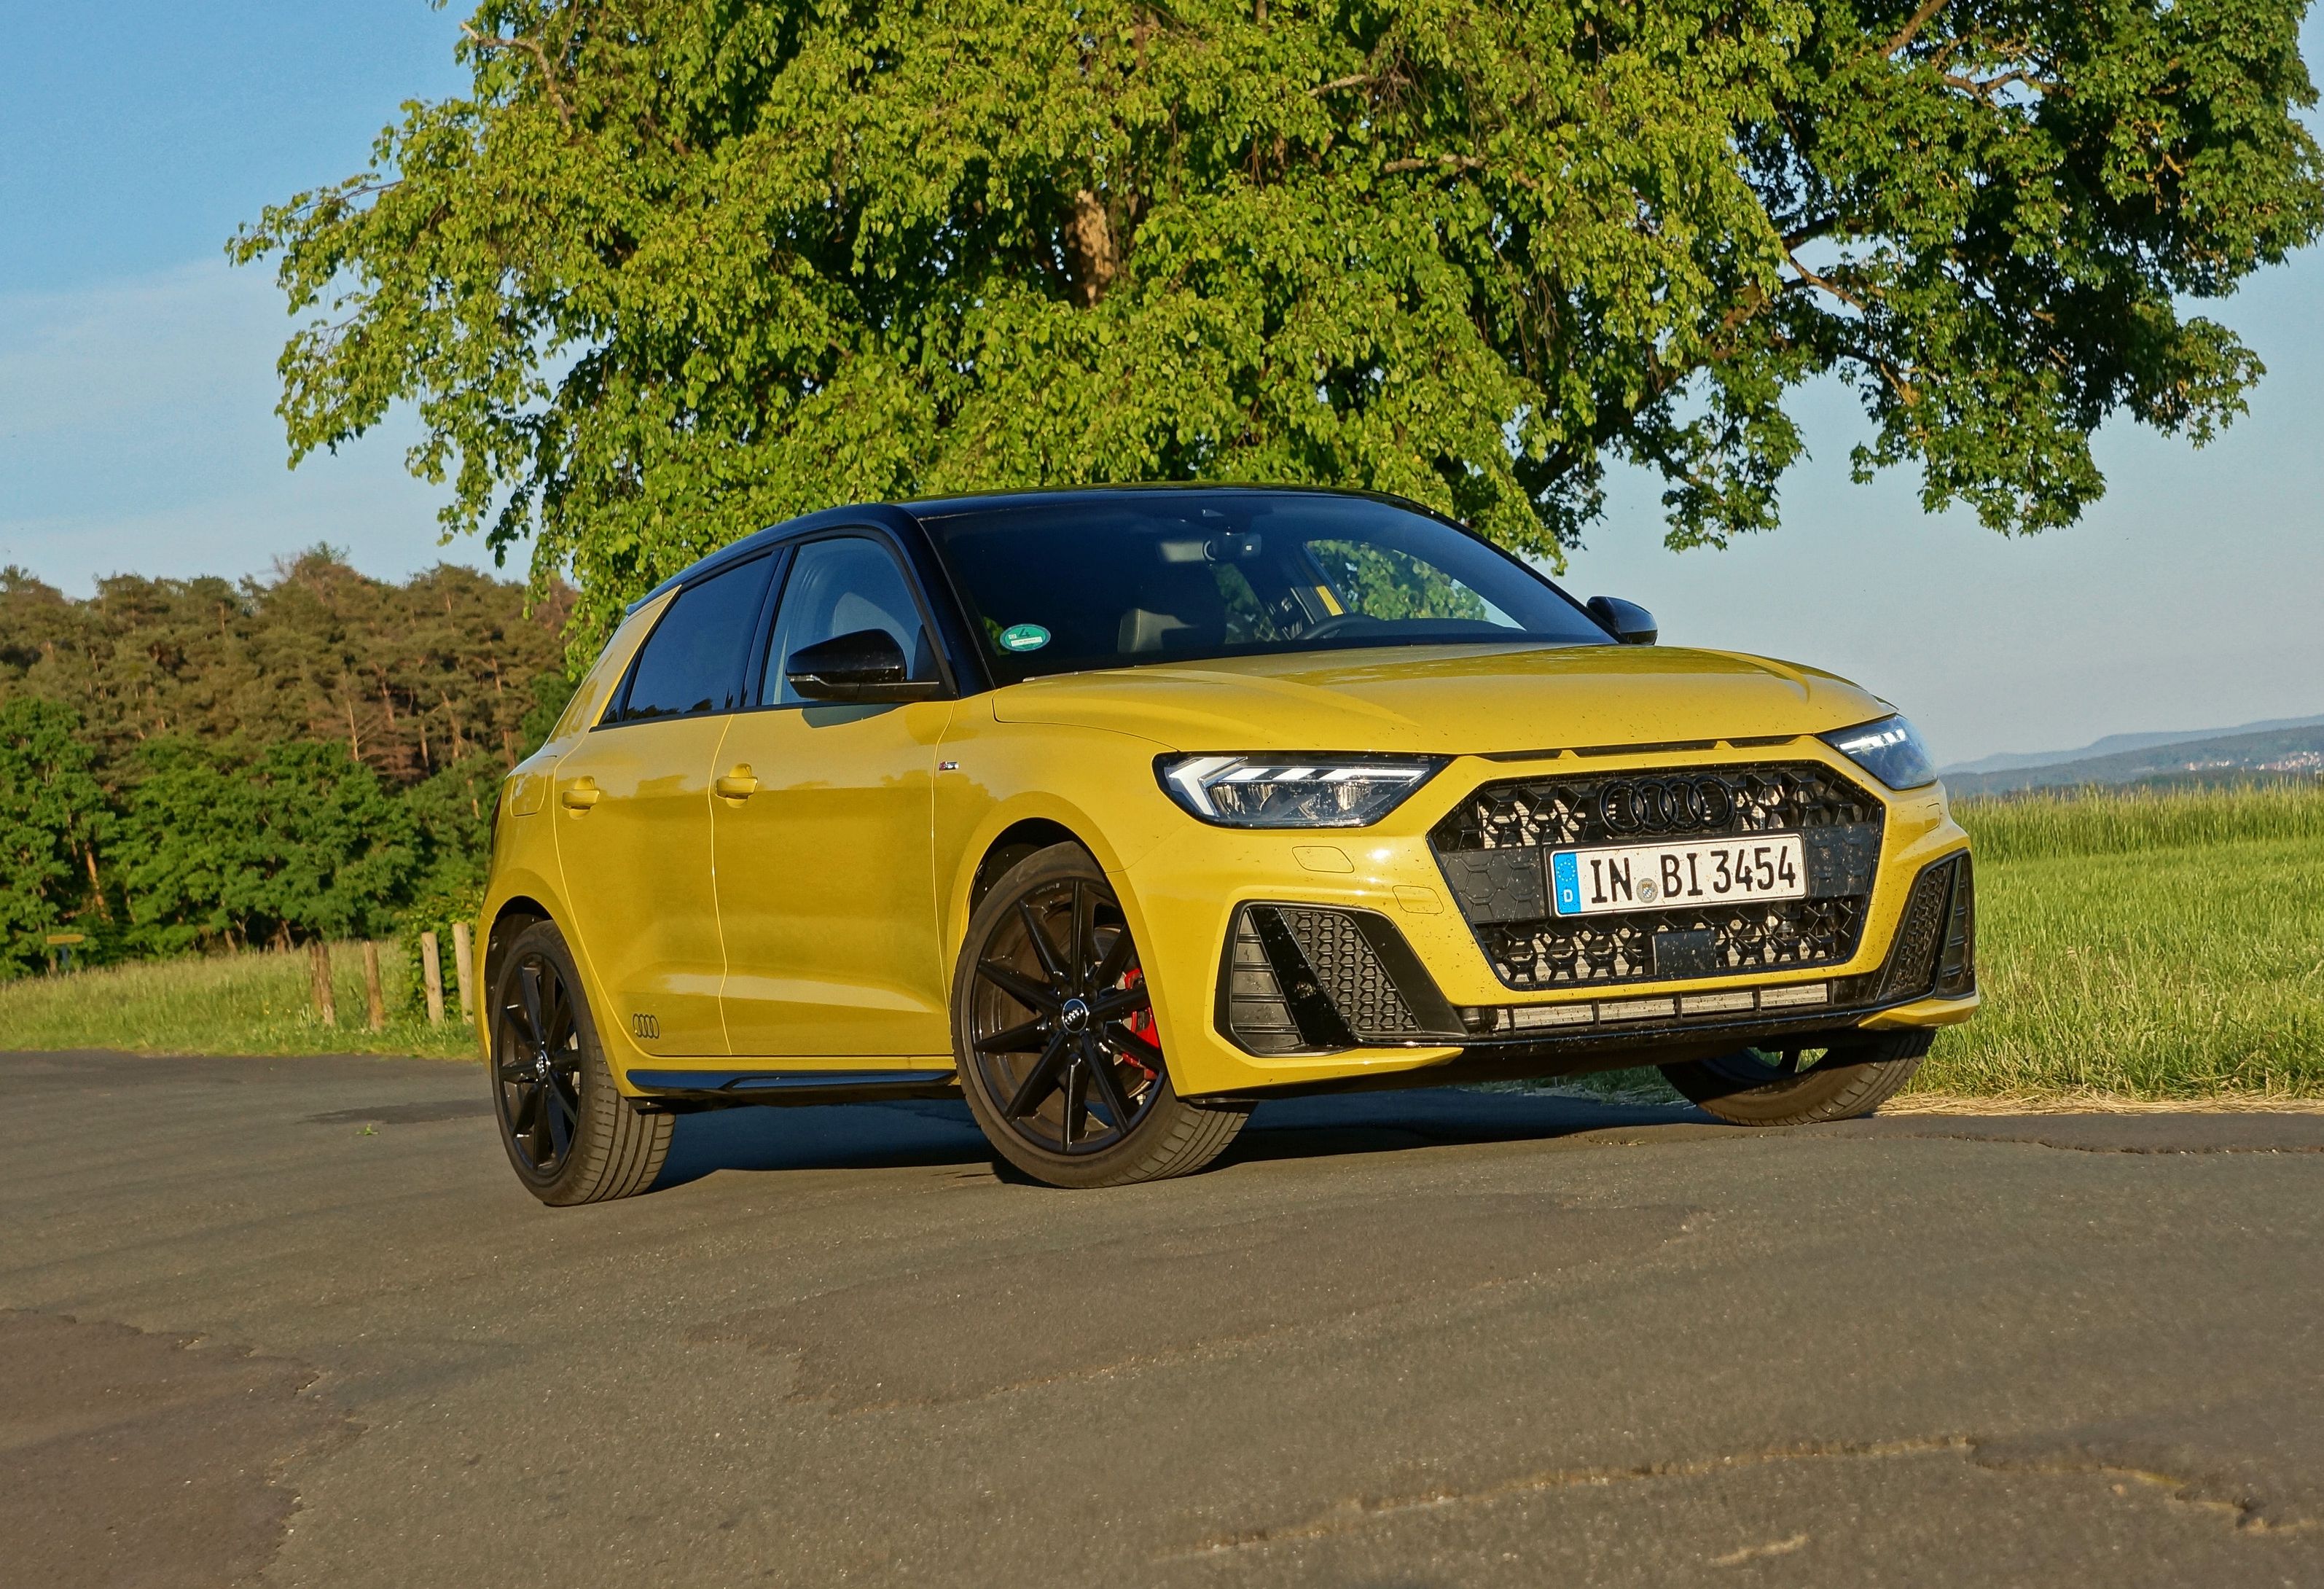 kaart ontwikkelen Skim The 2020 Audi A1 Offers a Premium Experience in a Small Package